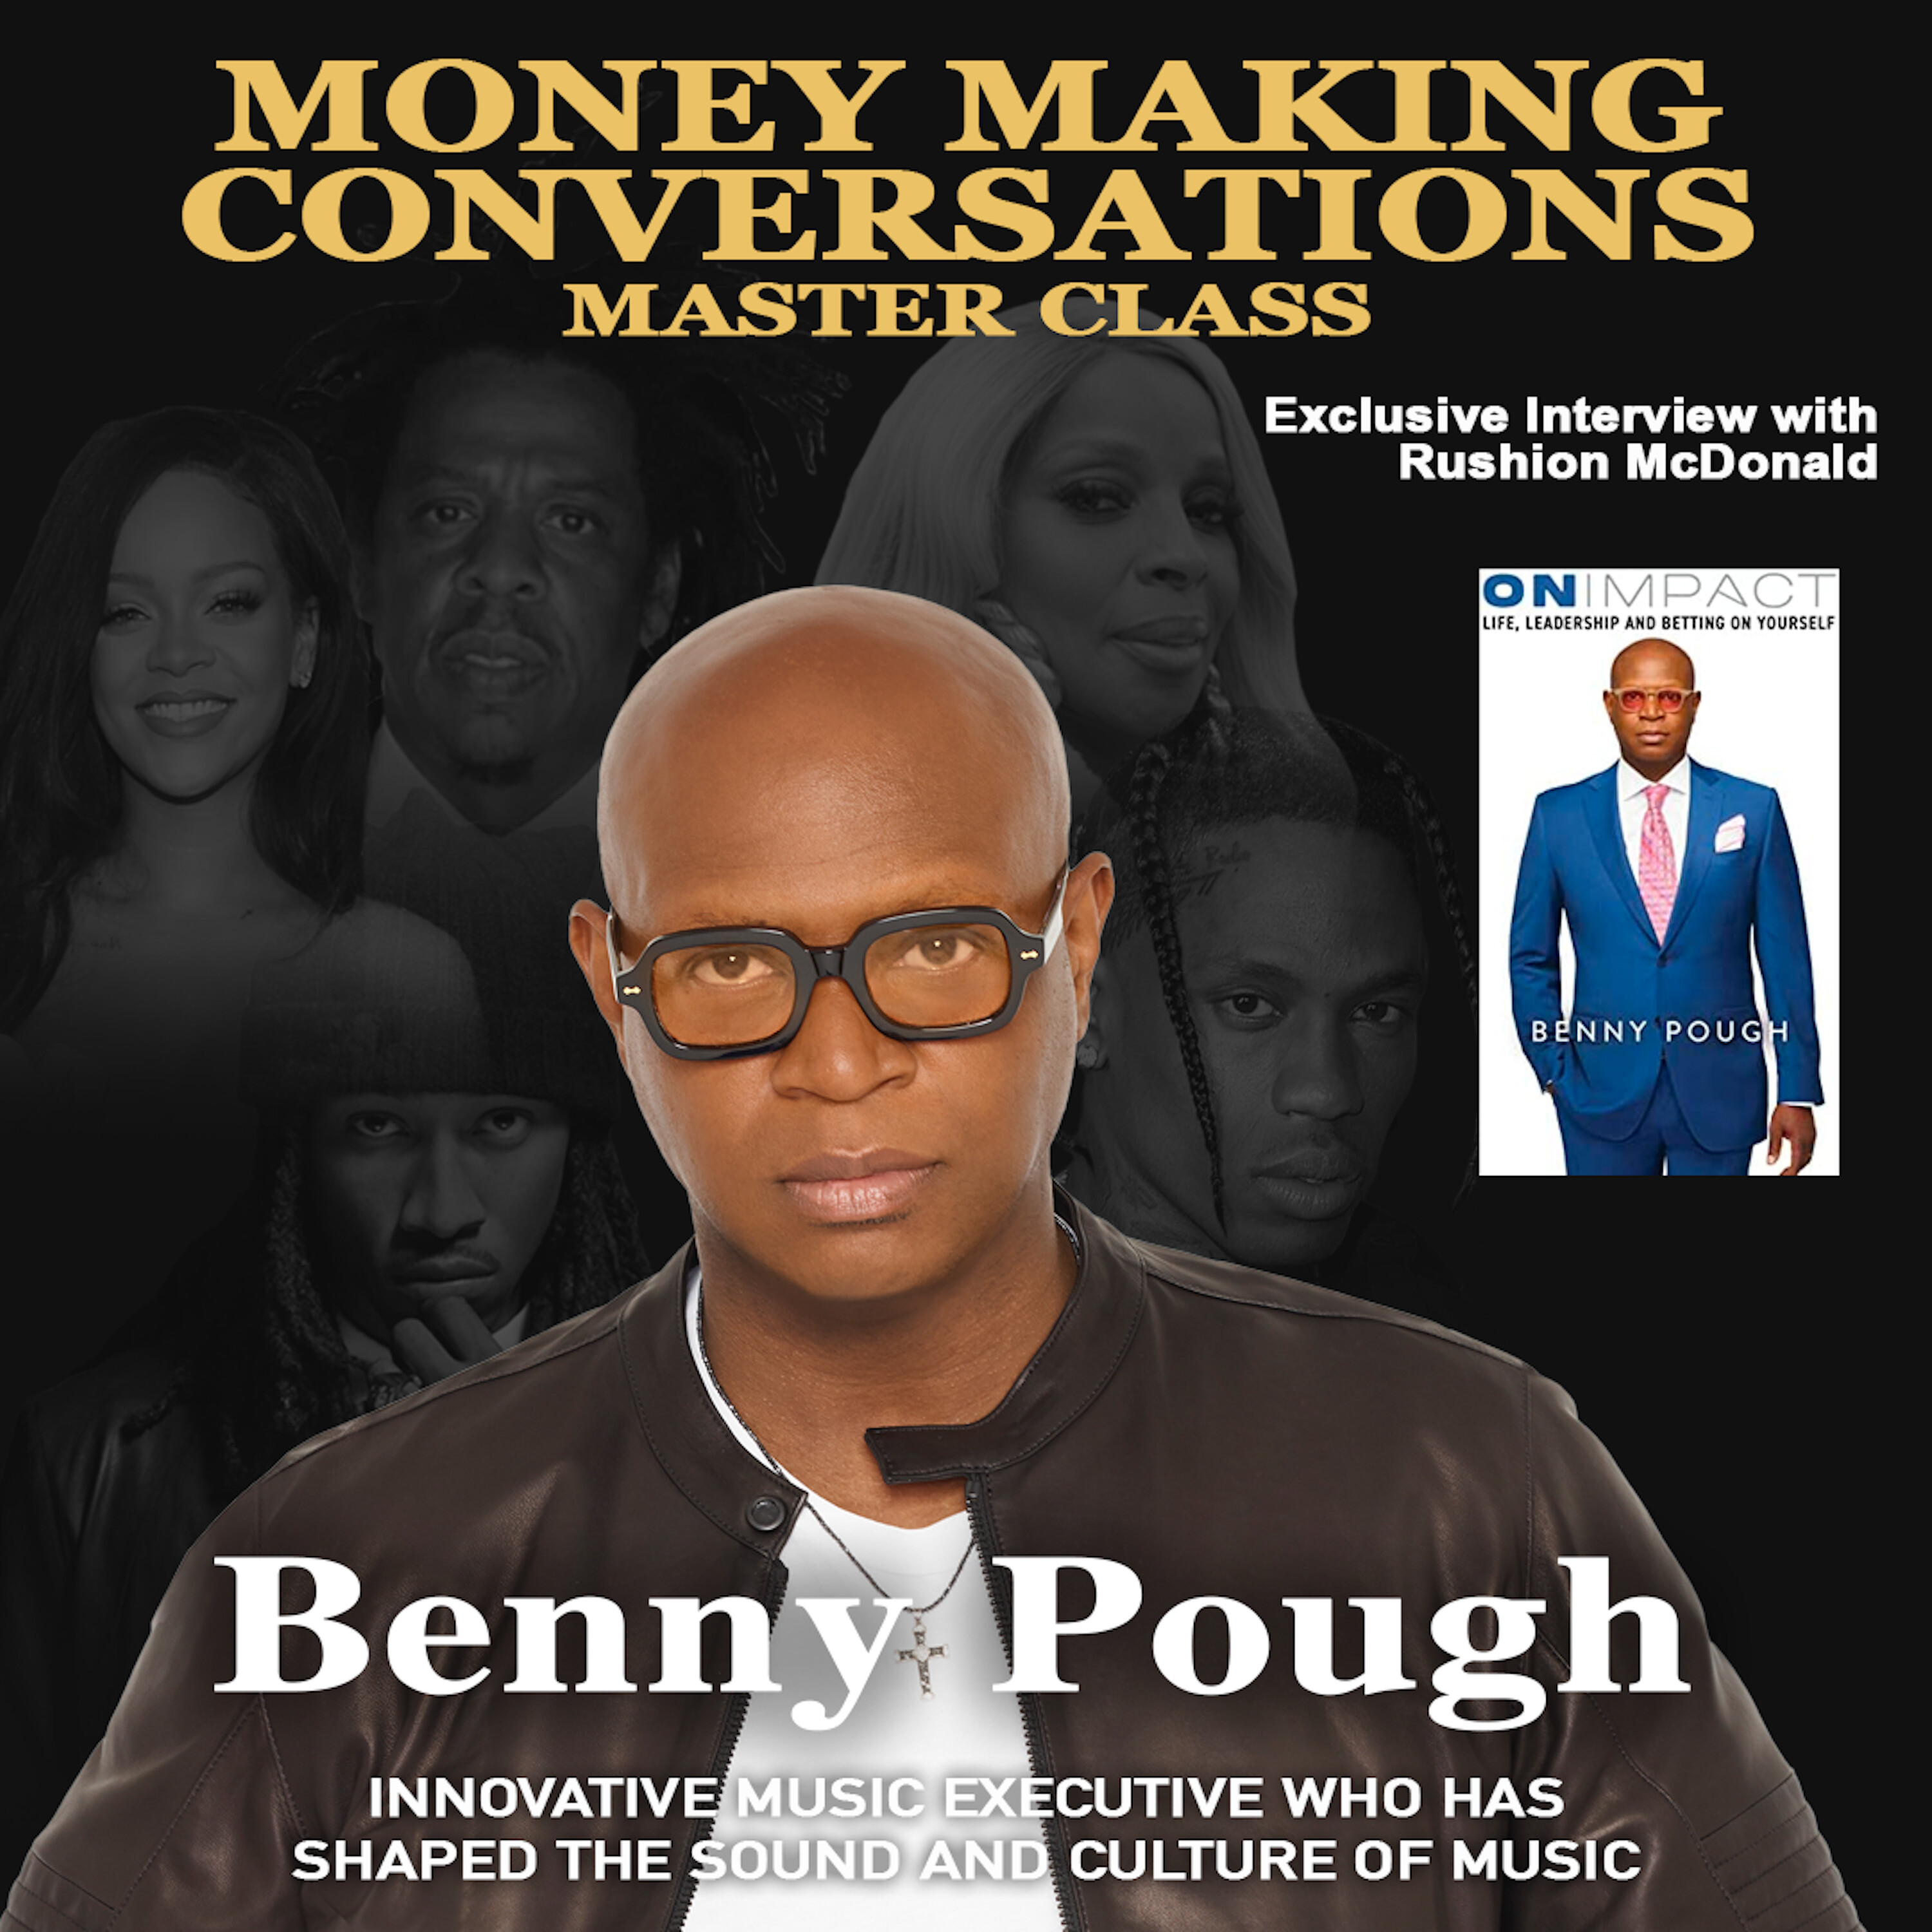 Music Industry Exec, Benny Pough discusses Jay-Z, Rihanna, Travis Scott, relationship building and personal branding.